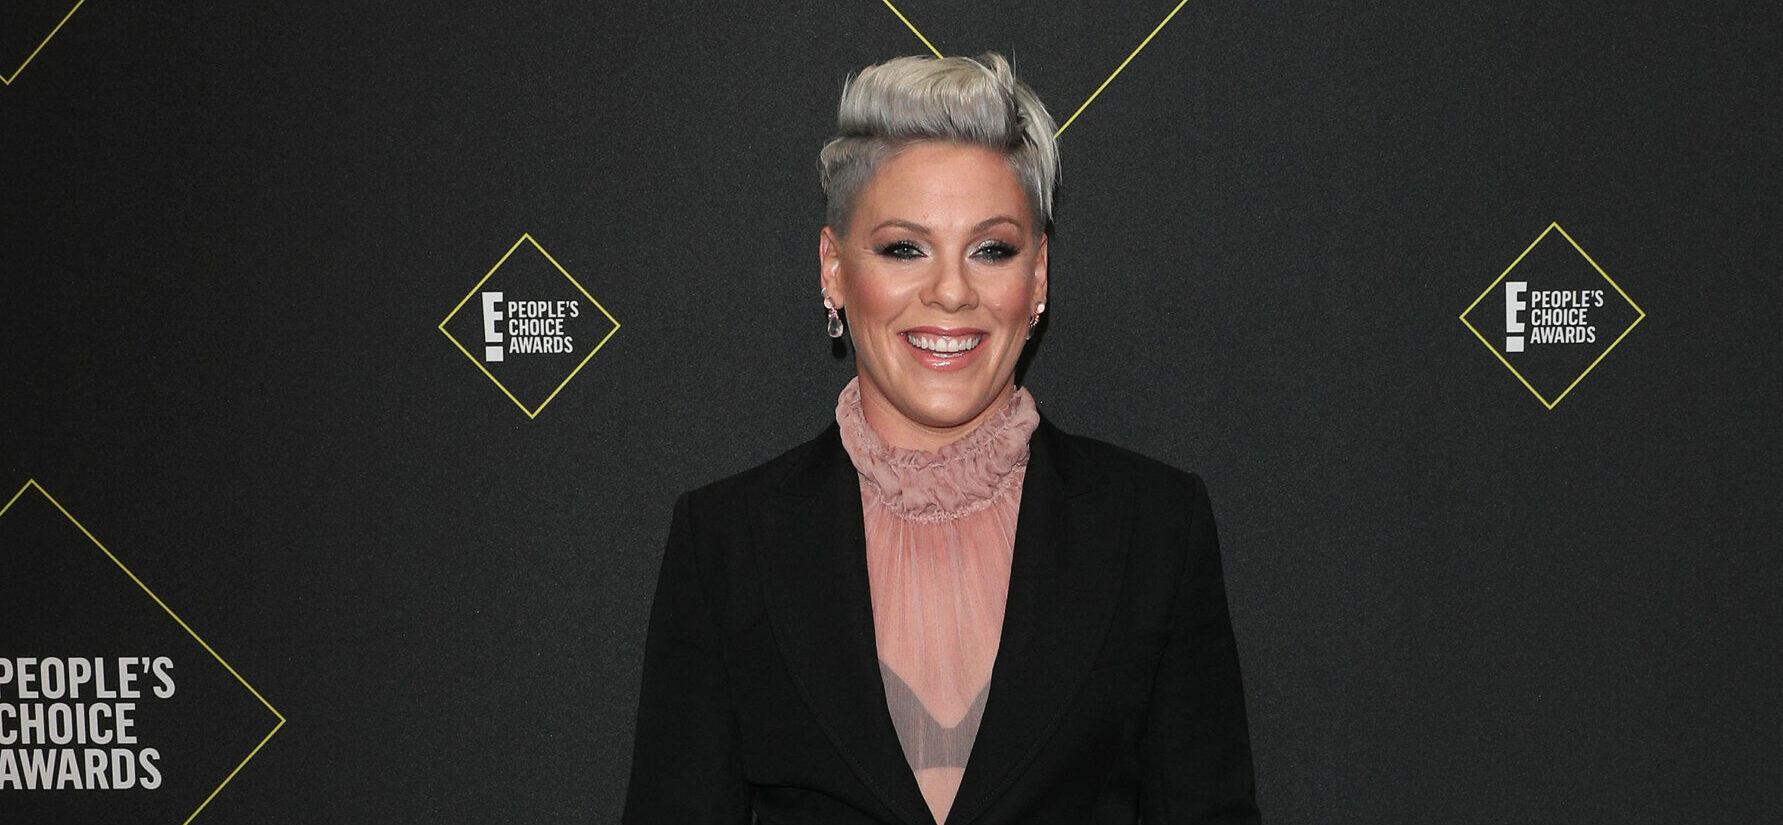 Singer Pink at the 45th Annual Peoples Choice Awards In Los Angeles